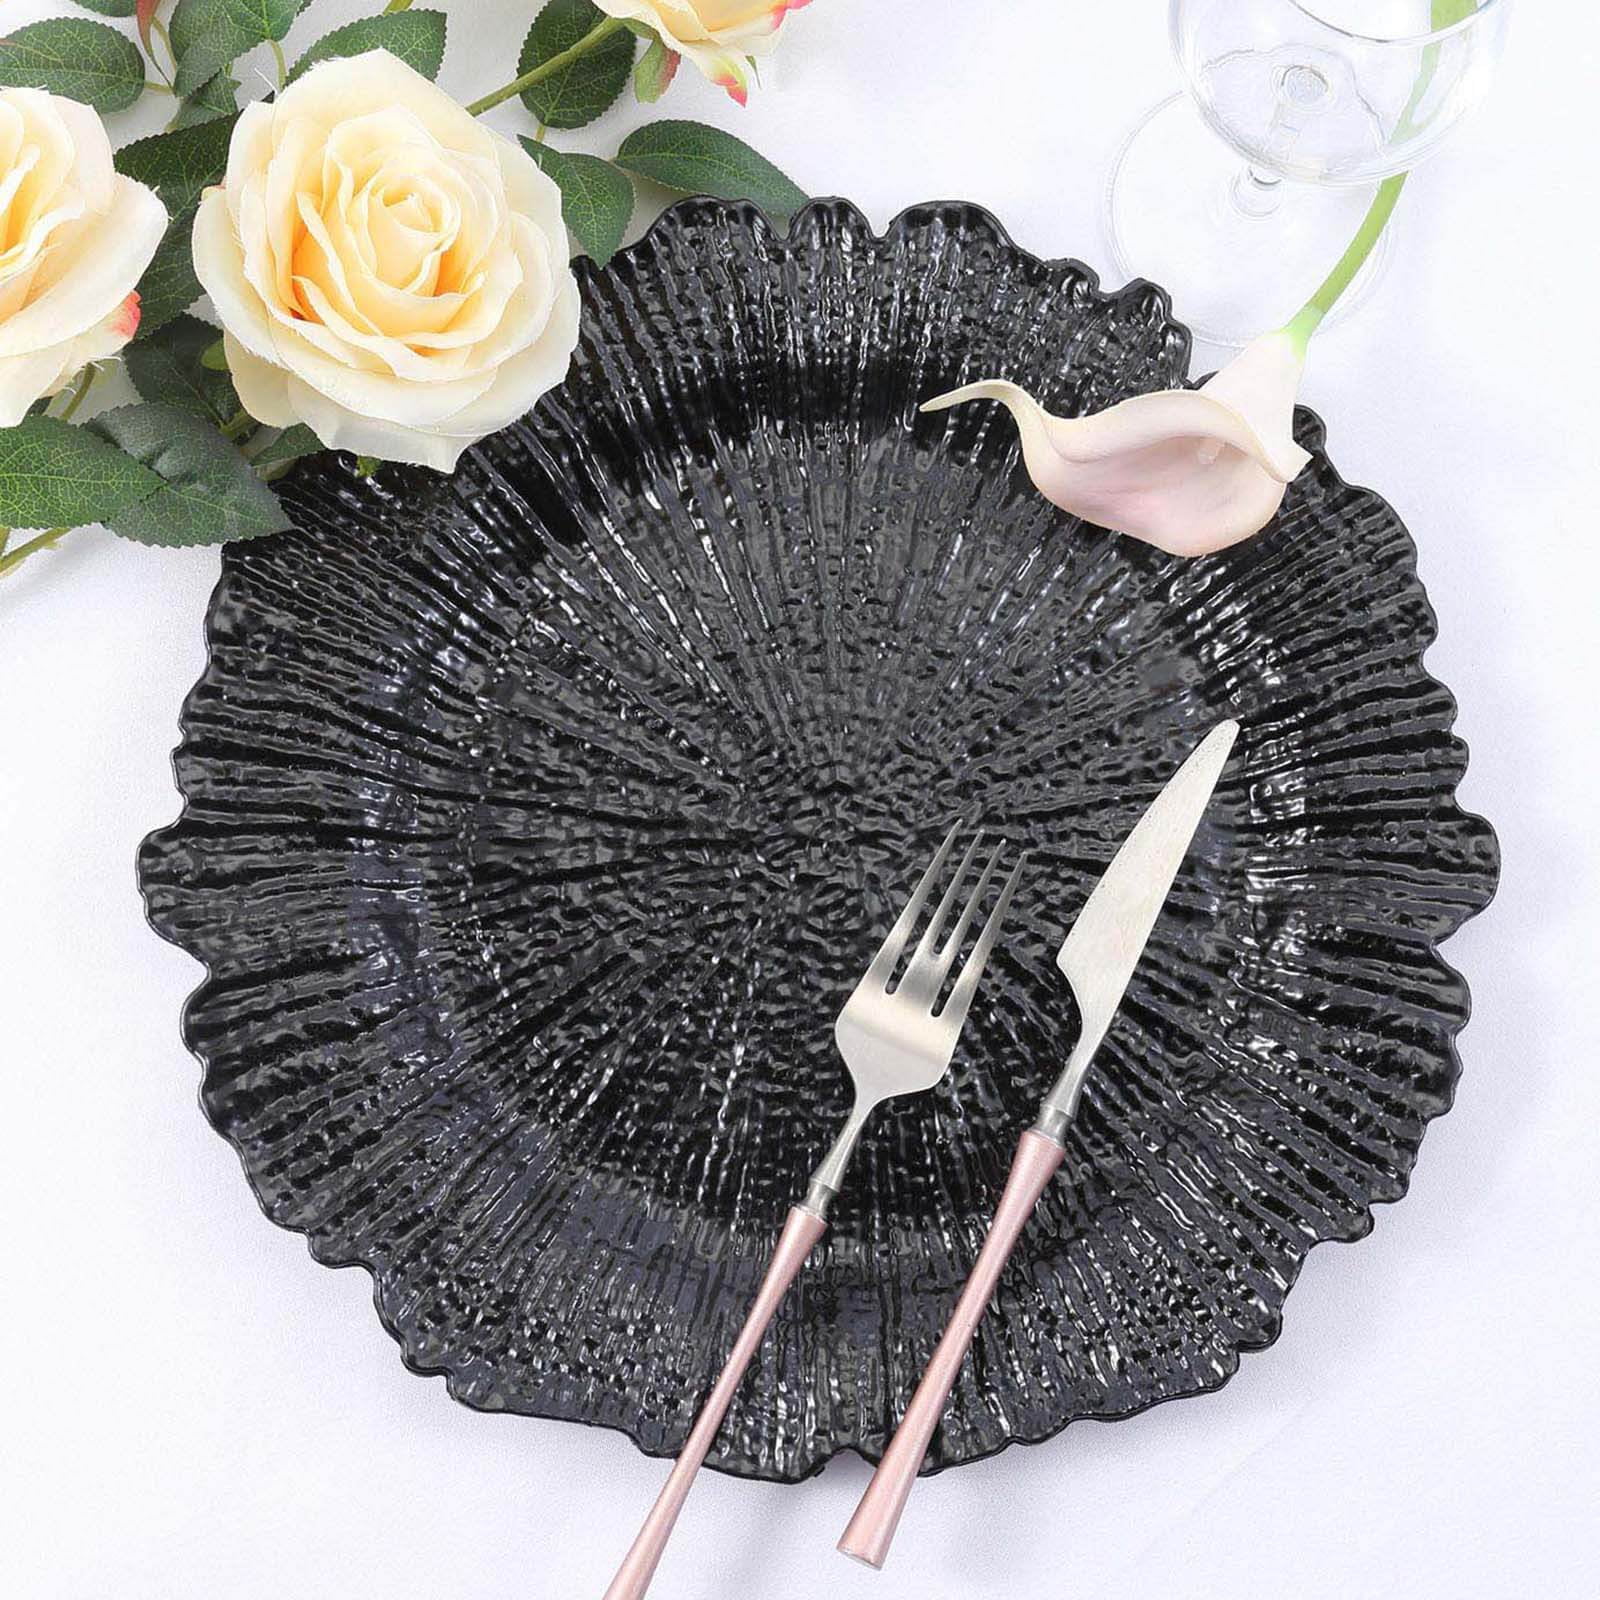 Set of 6 13 inch USA Party Flower Elegant Plastic Reef Charger Plate